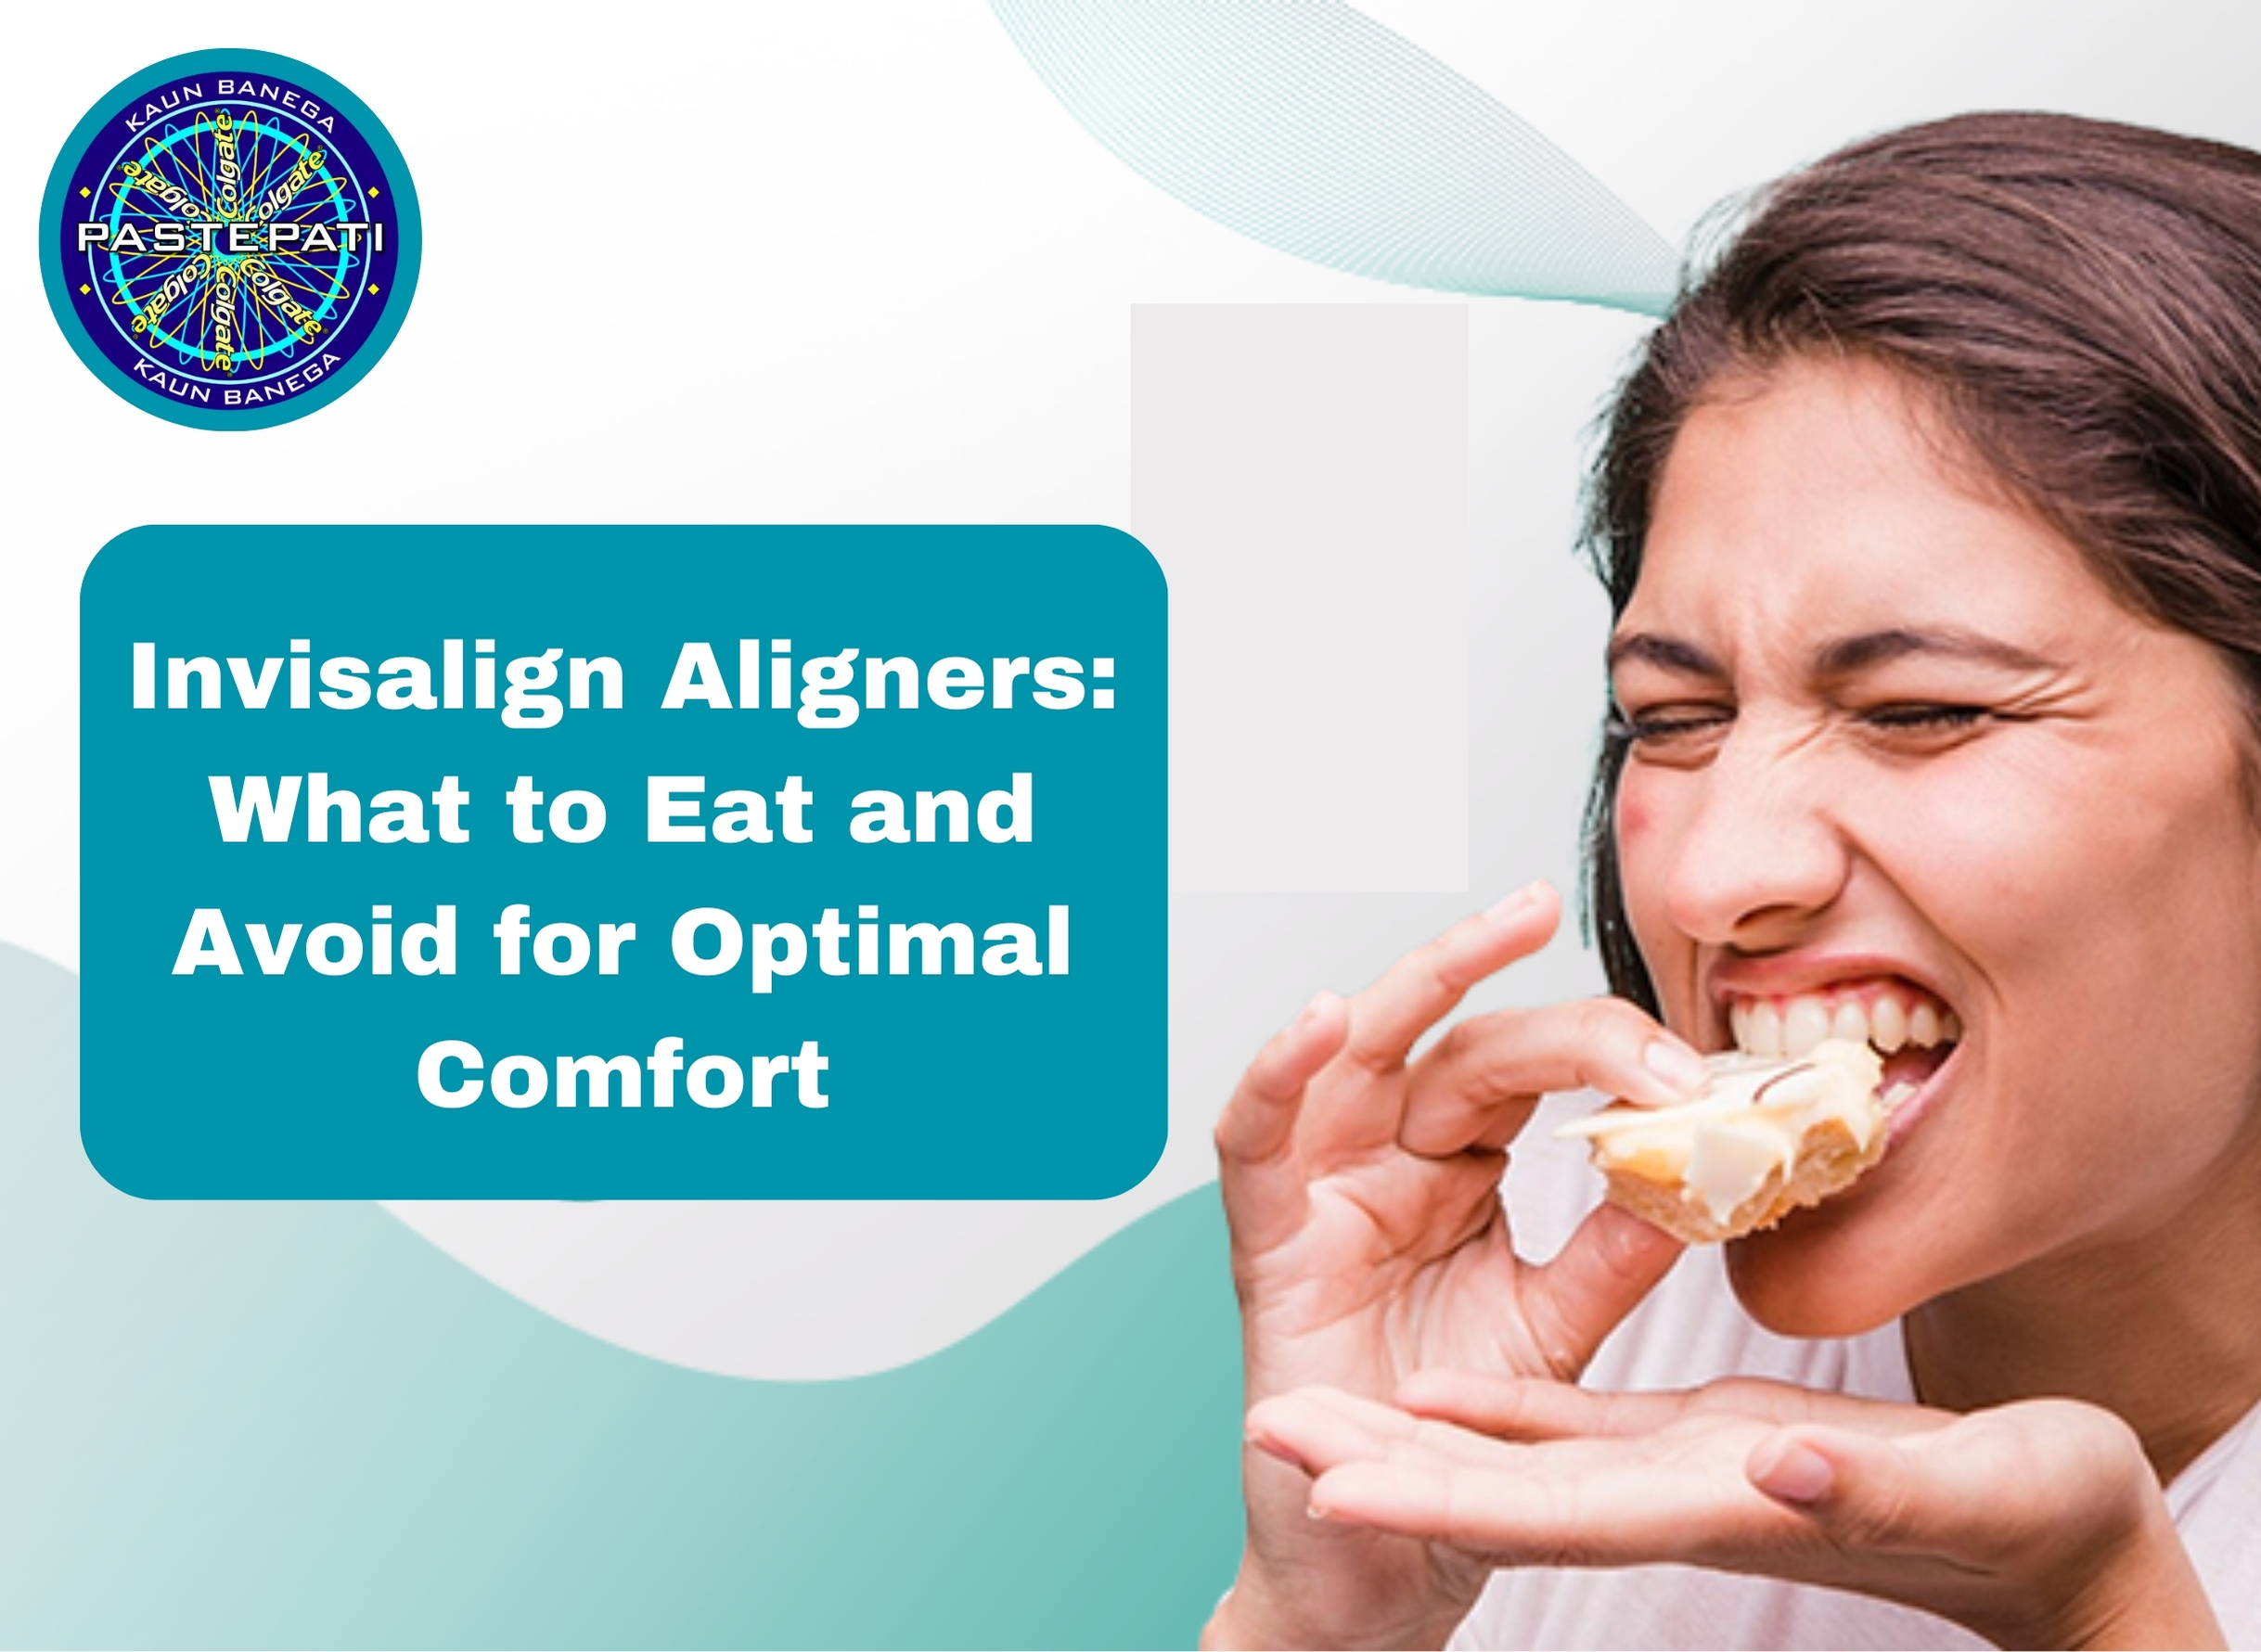 Invisalign Aligners: What to Eat and Avoid for Optimal Comfort